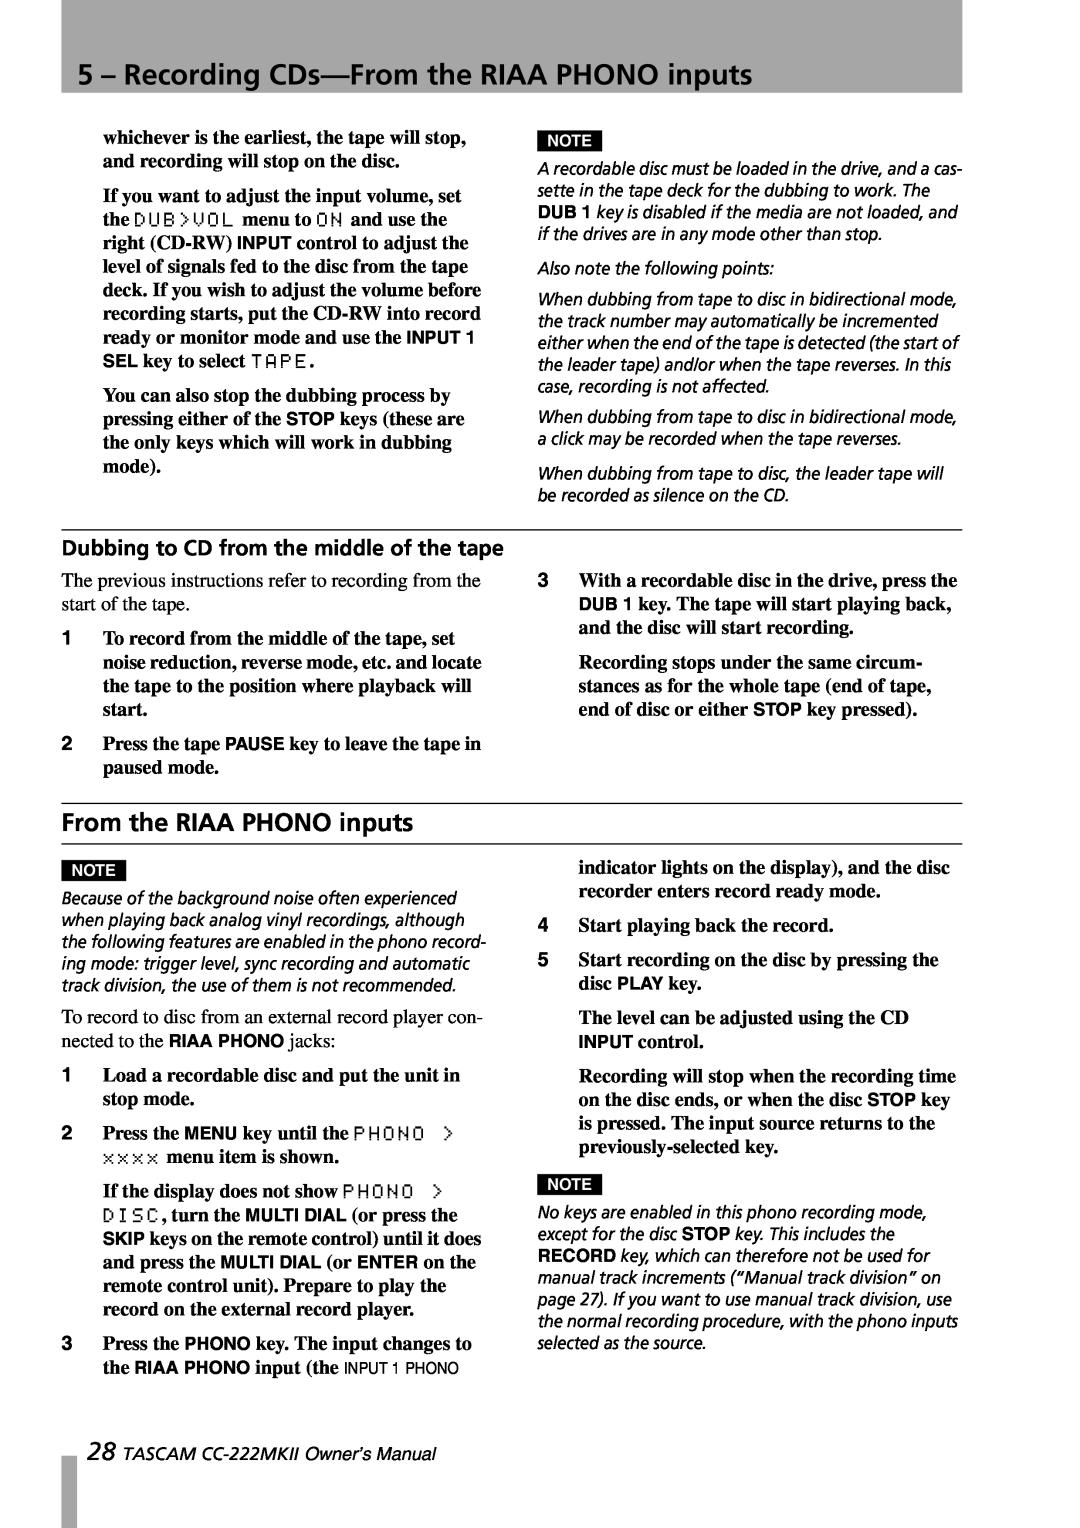 Tascam CC-222MKII owner manual Recording CDs-Fromthe RIAA PHONO inputs, From the RIAA PHONO inputs 